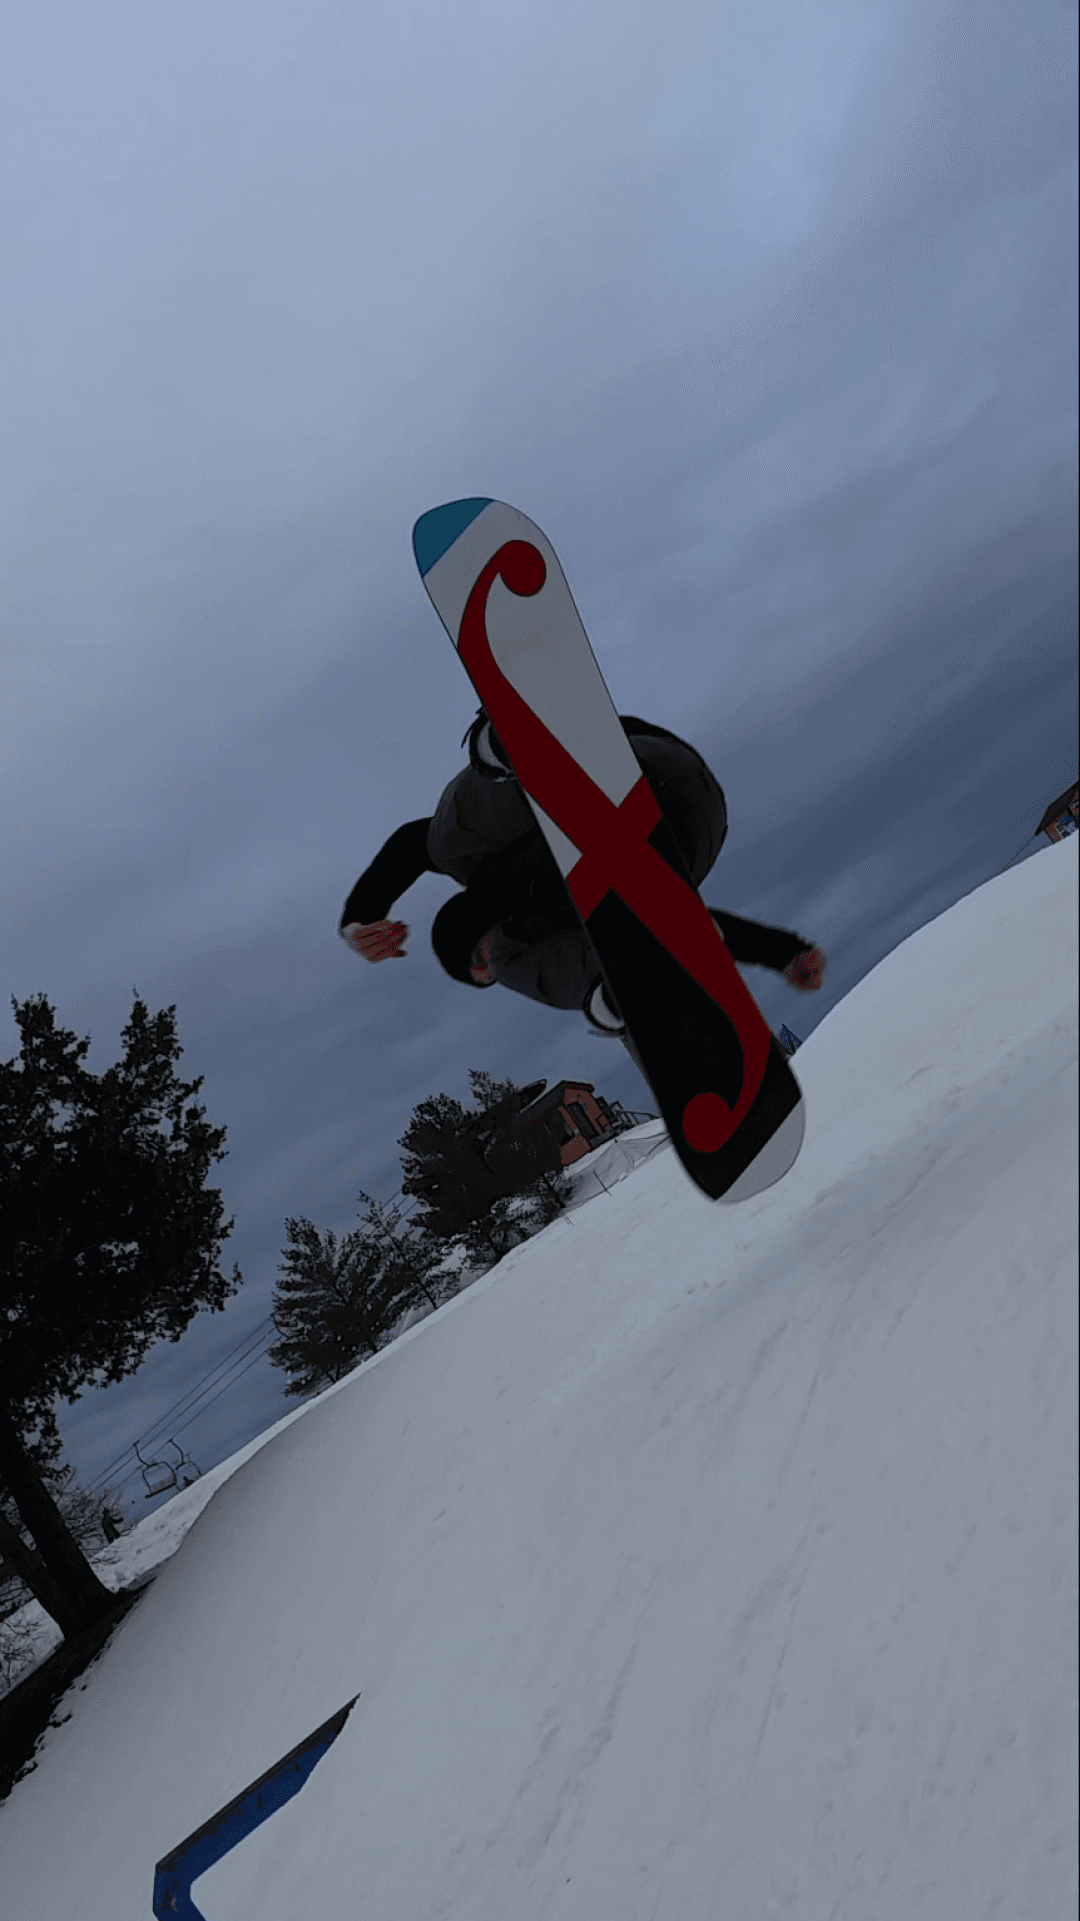 Image of Jordan Ready on a snowboard mid air performing a cork 540 trick